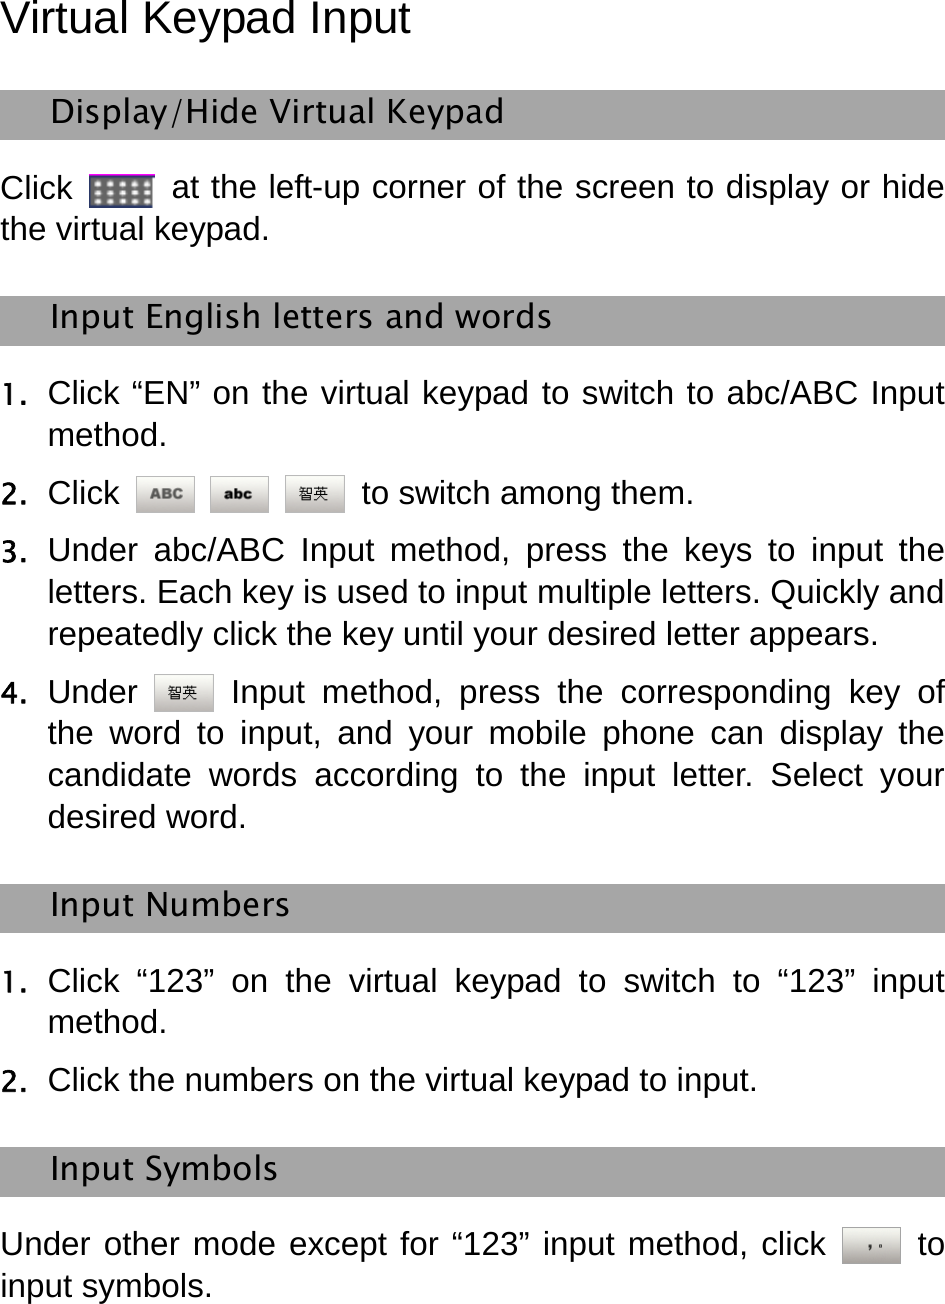   Virtual Keypad Input   Display/Hide Virtual Keypad   Click    at the left-up corner of the screen to display or hide the virtual keypad.   Input English letters and words   1. Click “EN” on the virtual keypad to switch to abc/ABC Input method. 2. Click      to switch among them. 3. Under abc/ABC Input method, press the keys to input the letters. Each key is used to input multiple letters. Quickly and repeatedly click the key until your desired letter appears.   4. Under   Input method, press the corresponding key of the word to input, and your mobile phone can display the candidate words according to the input letter. Select your desired word.   Input Numbers   1. Click “123” on the virtual keypad to switch to “123” input method. 2. Click the numbers on the virtual keypad to input.   Input Symbols   Under other mode except for “123” input method, click   to input symbols.   